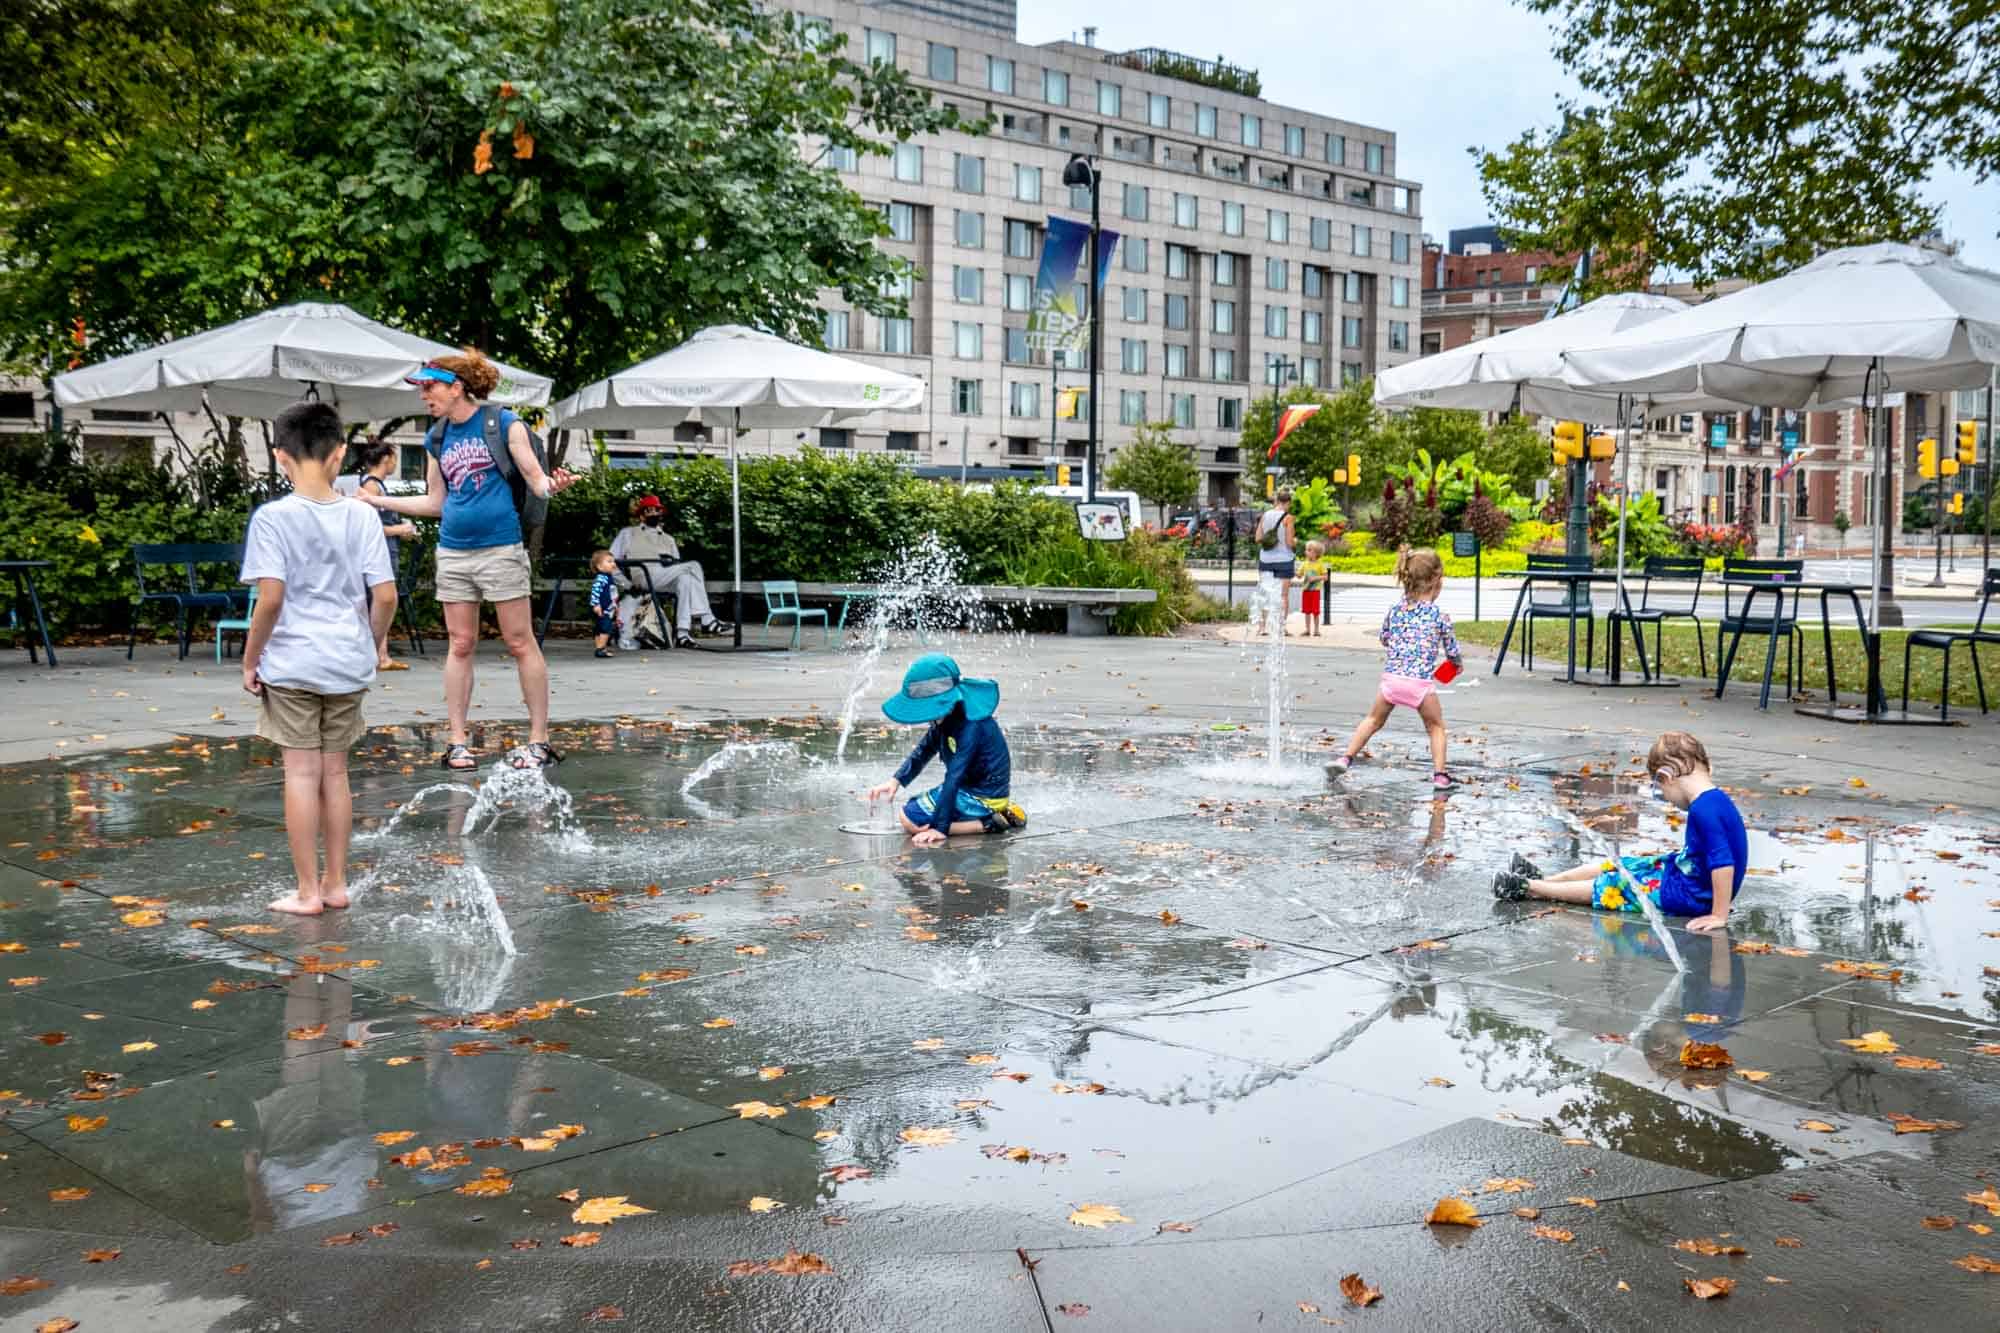 Kids playing in fountains in a park